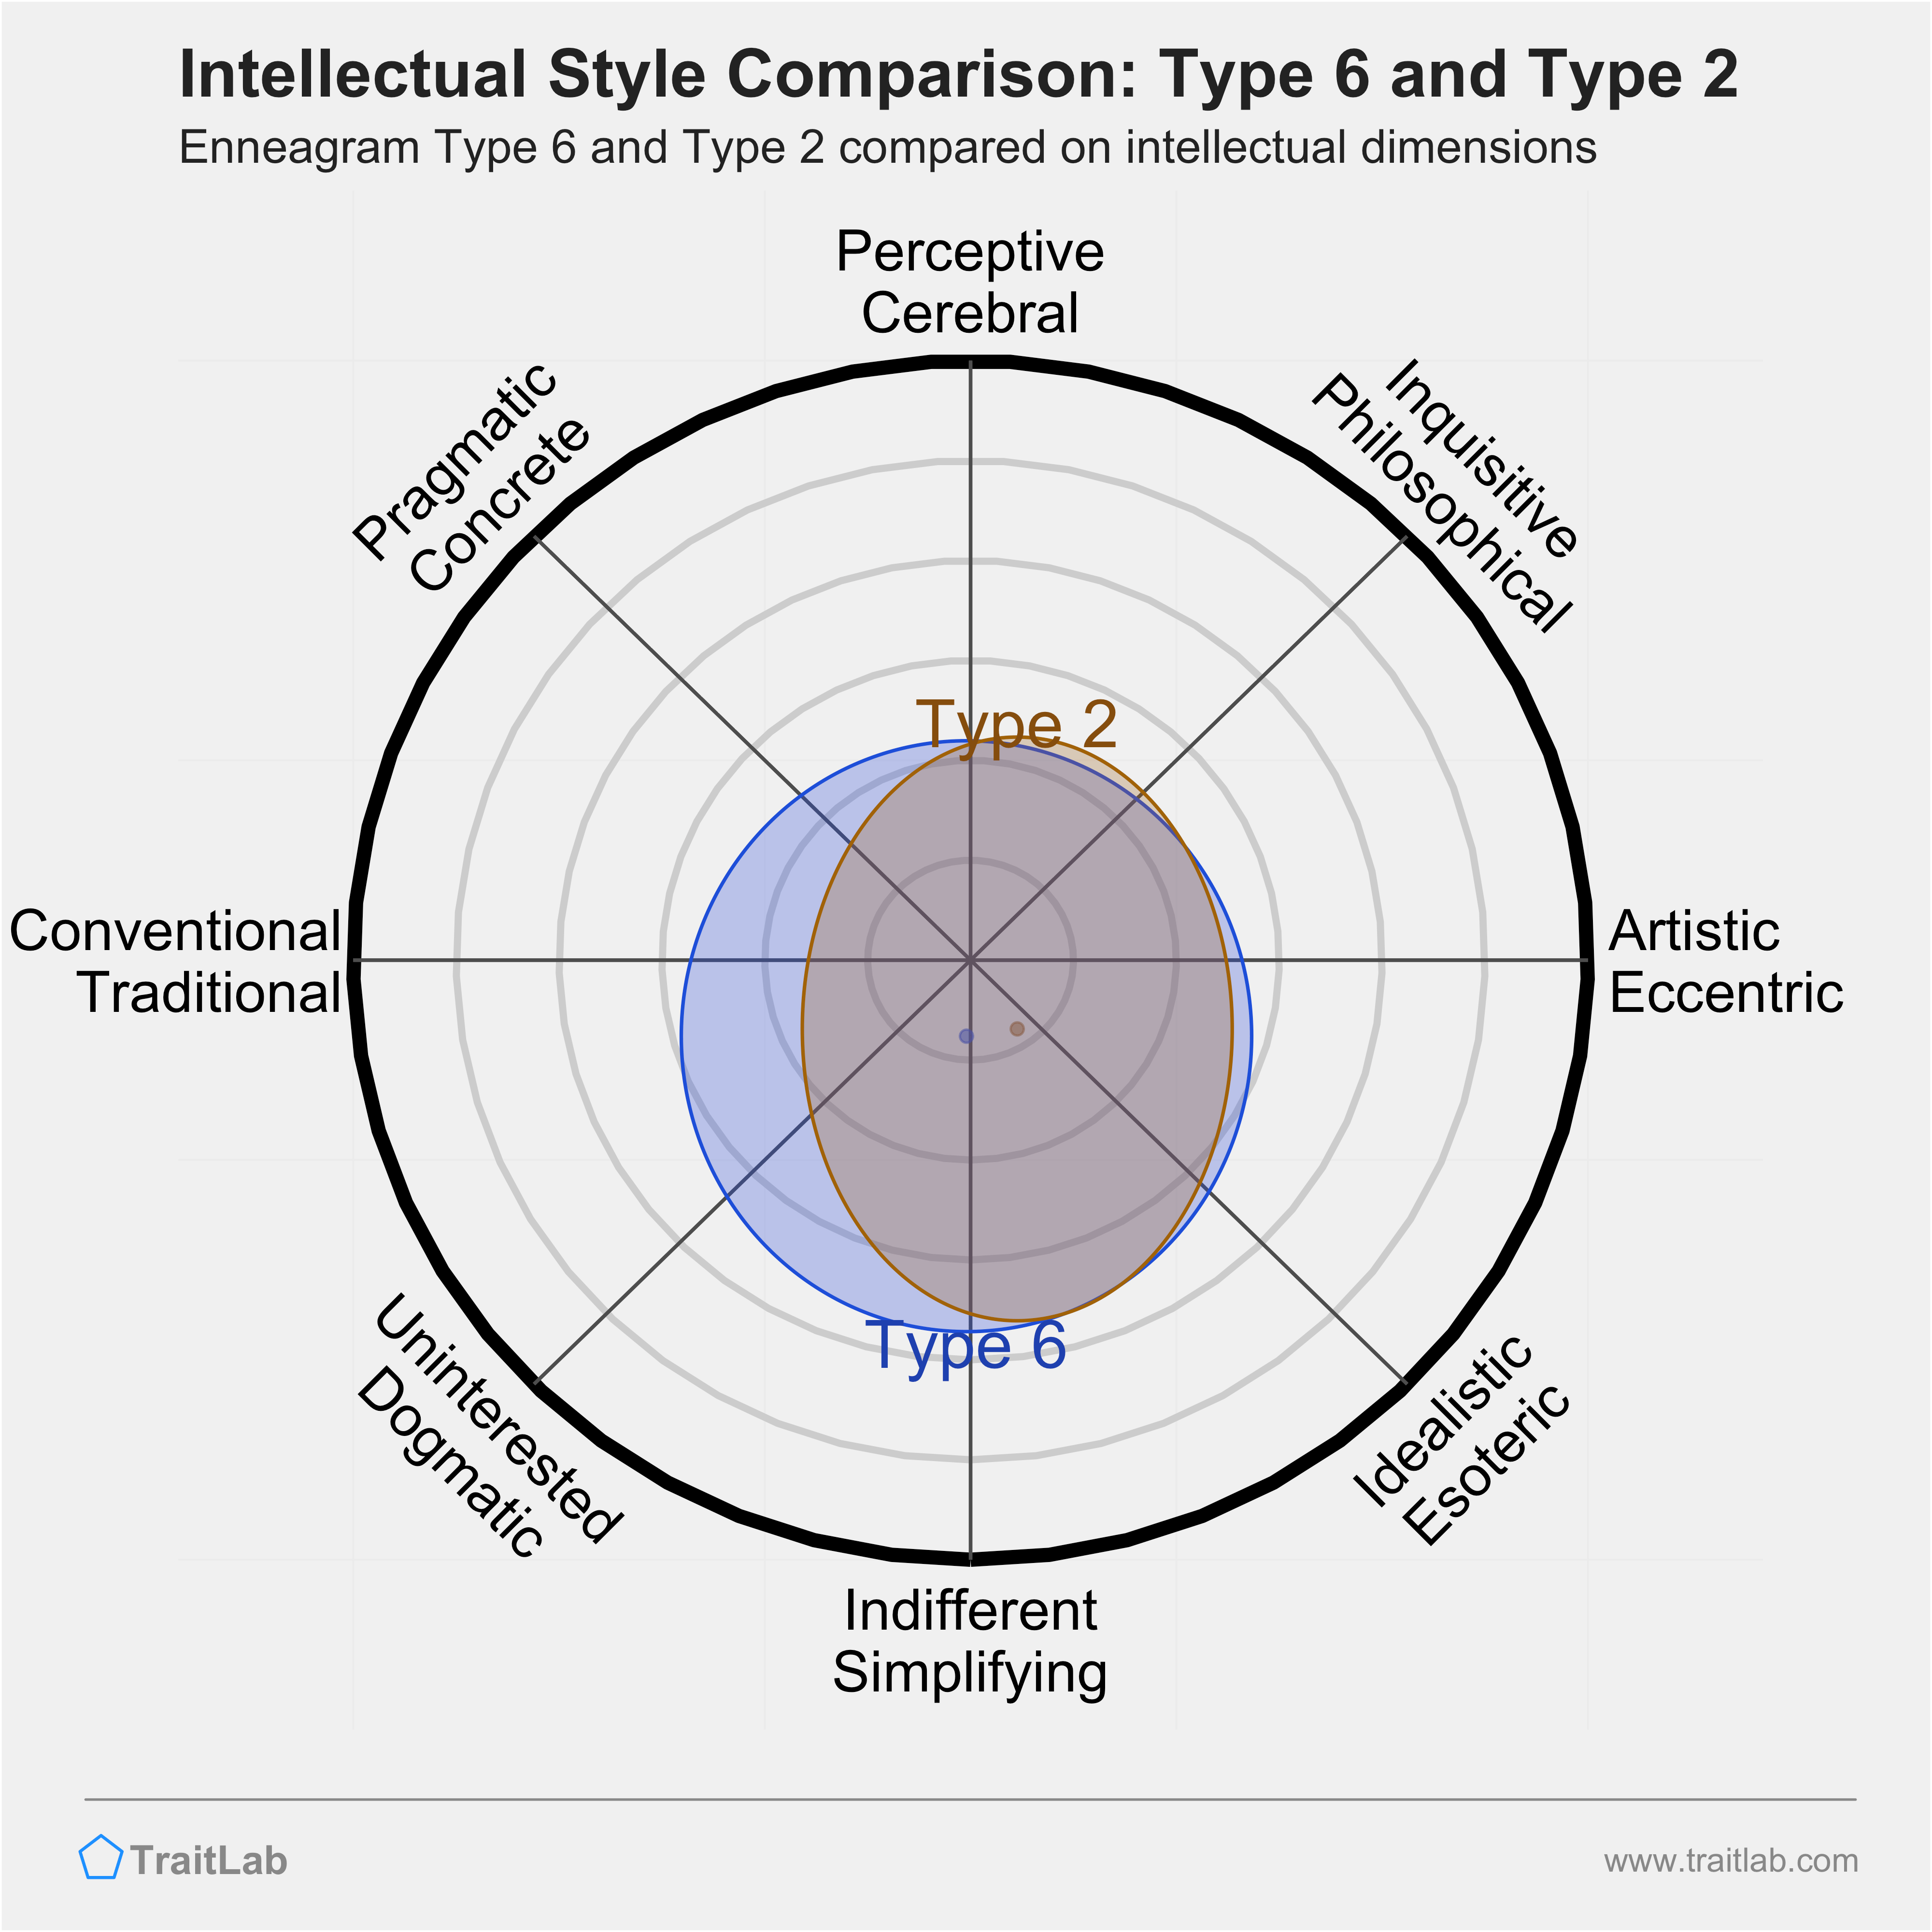 Type 6 and Type 2 comparison across intellectual dimensions